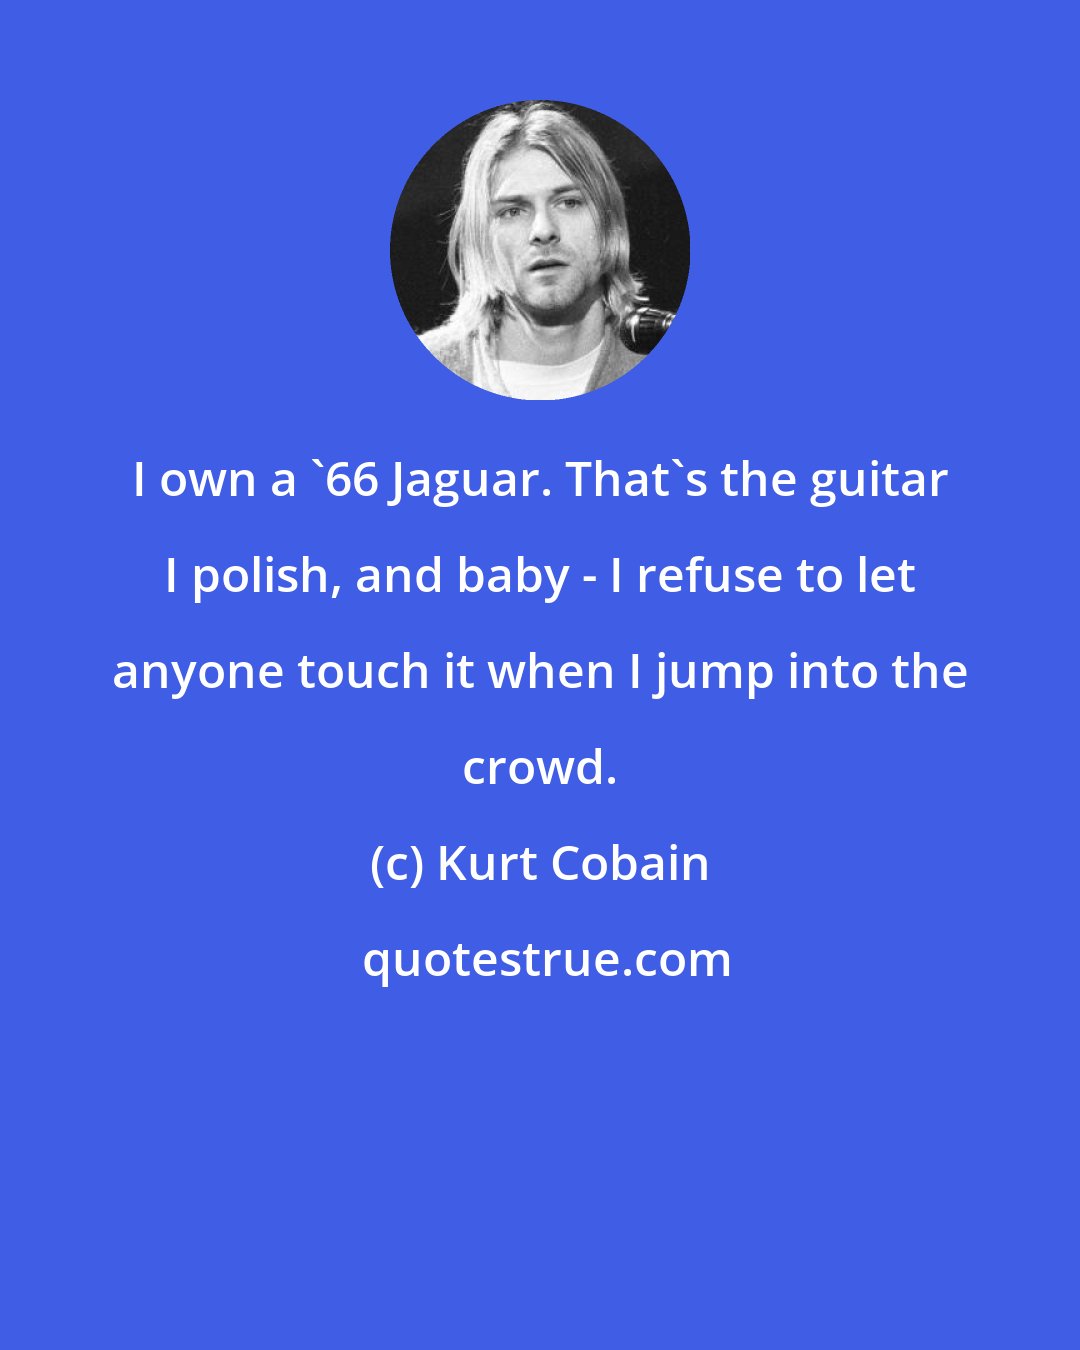 Kurt Cobain: I own a '66 Jaguar. That's the guitar I polish, and baby - I refuse to let anyone touch it when I jump into the crowd.